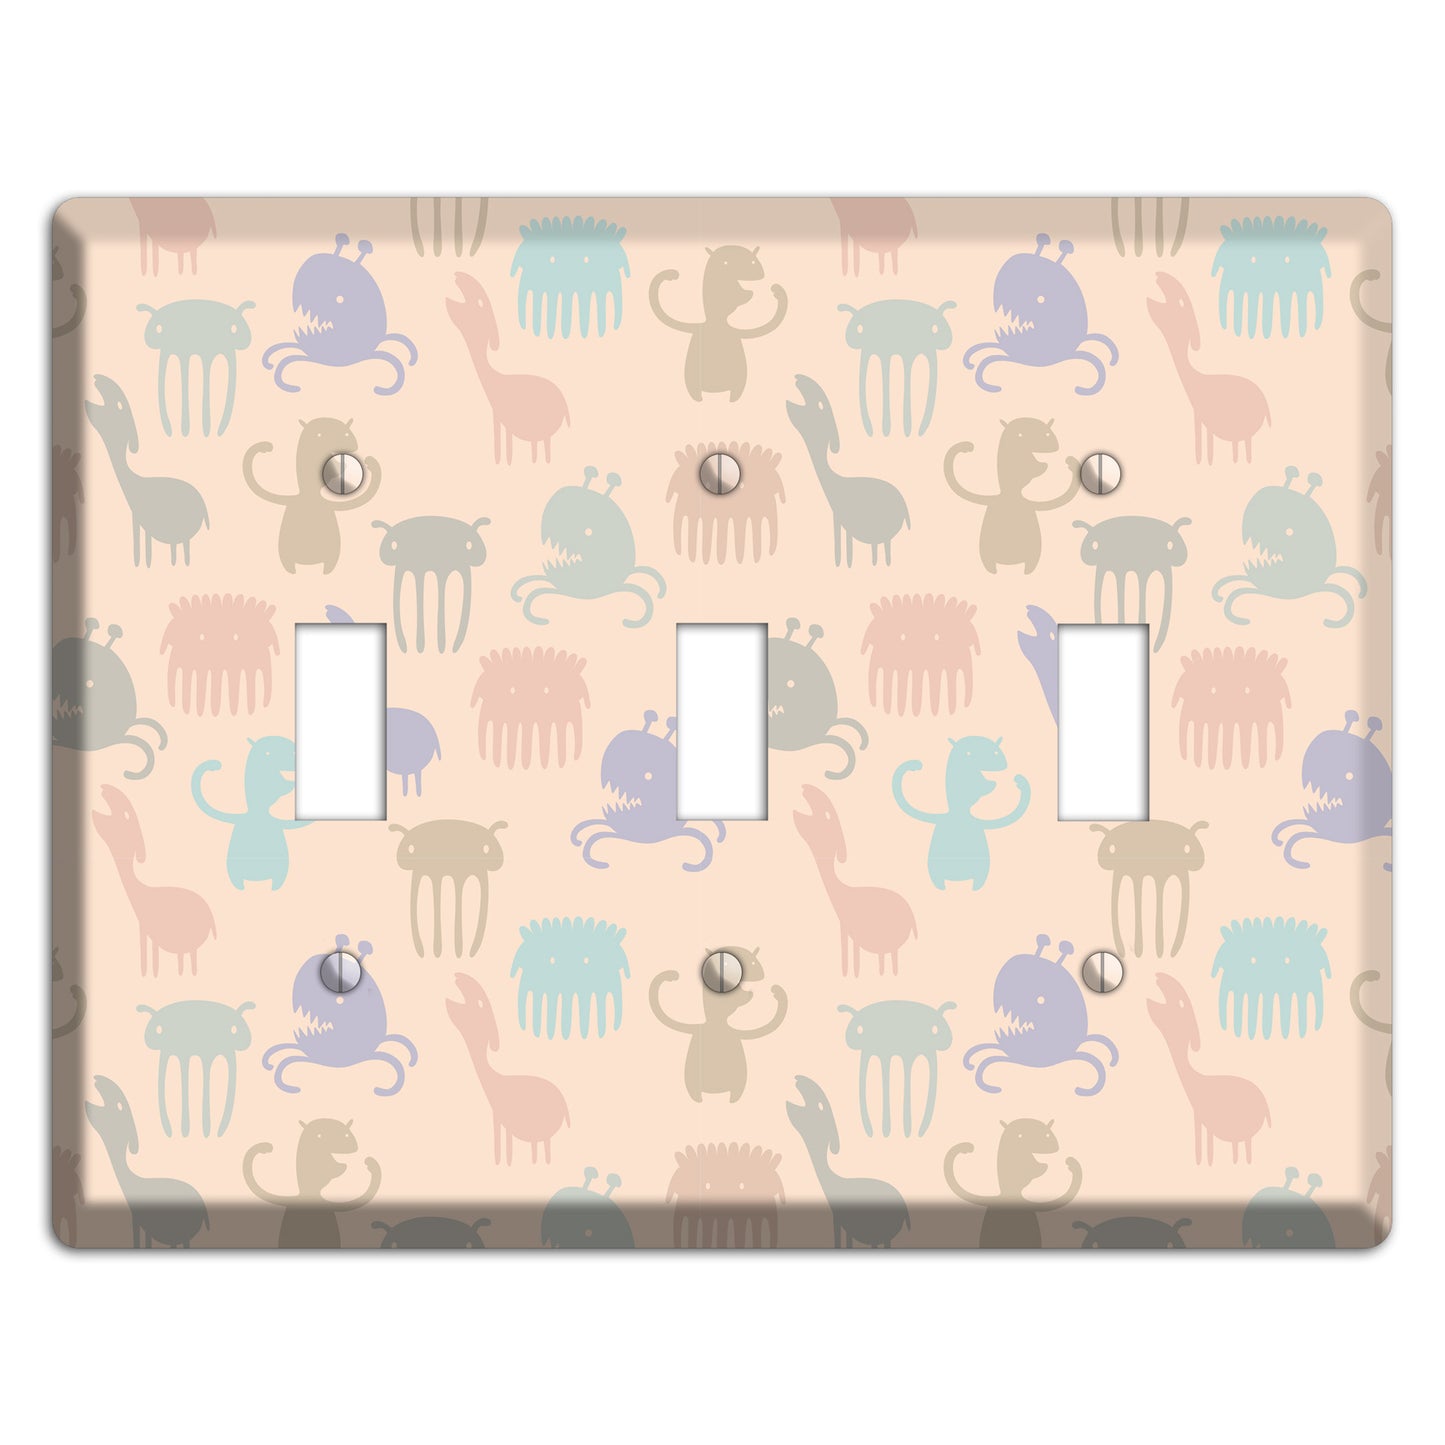 Green Grunge Floral Contour 3 Toggle Wallplate